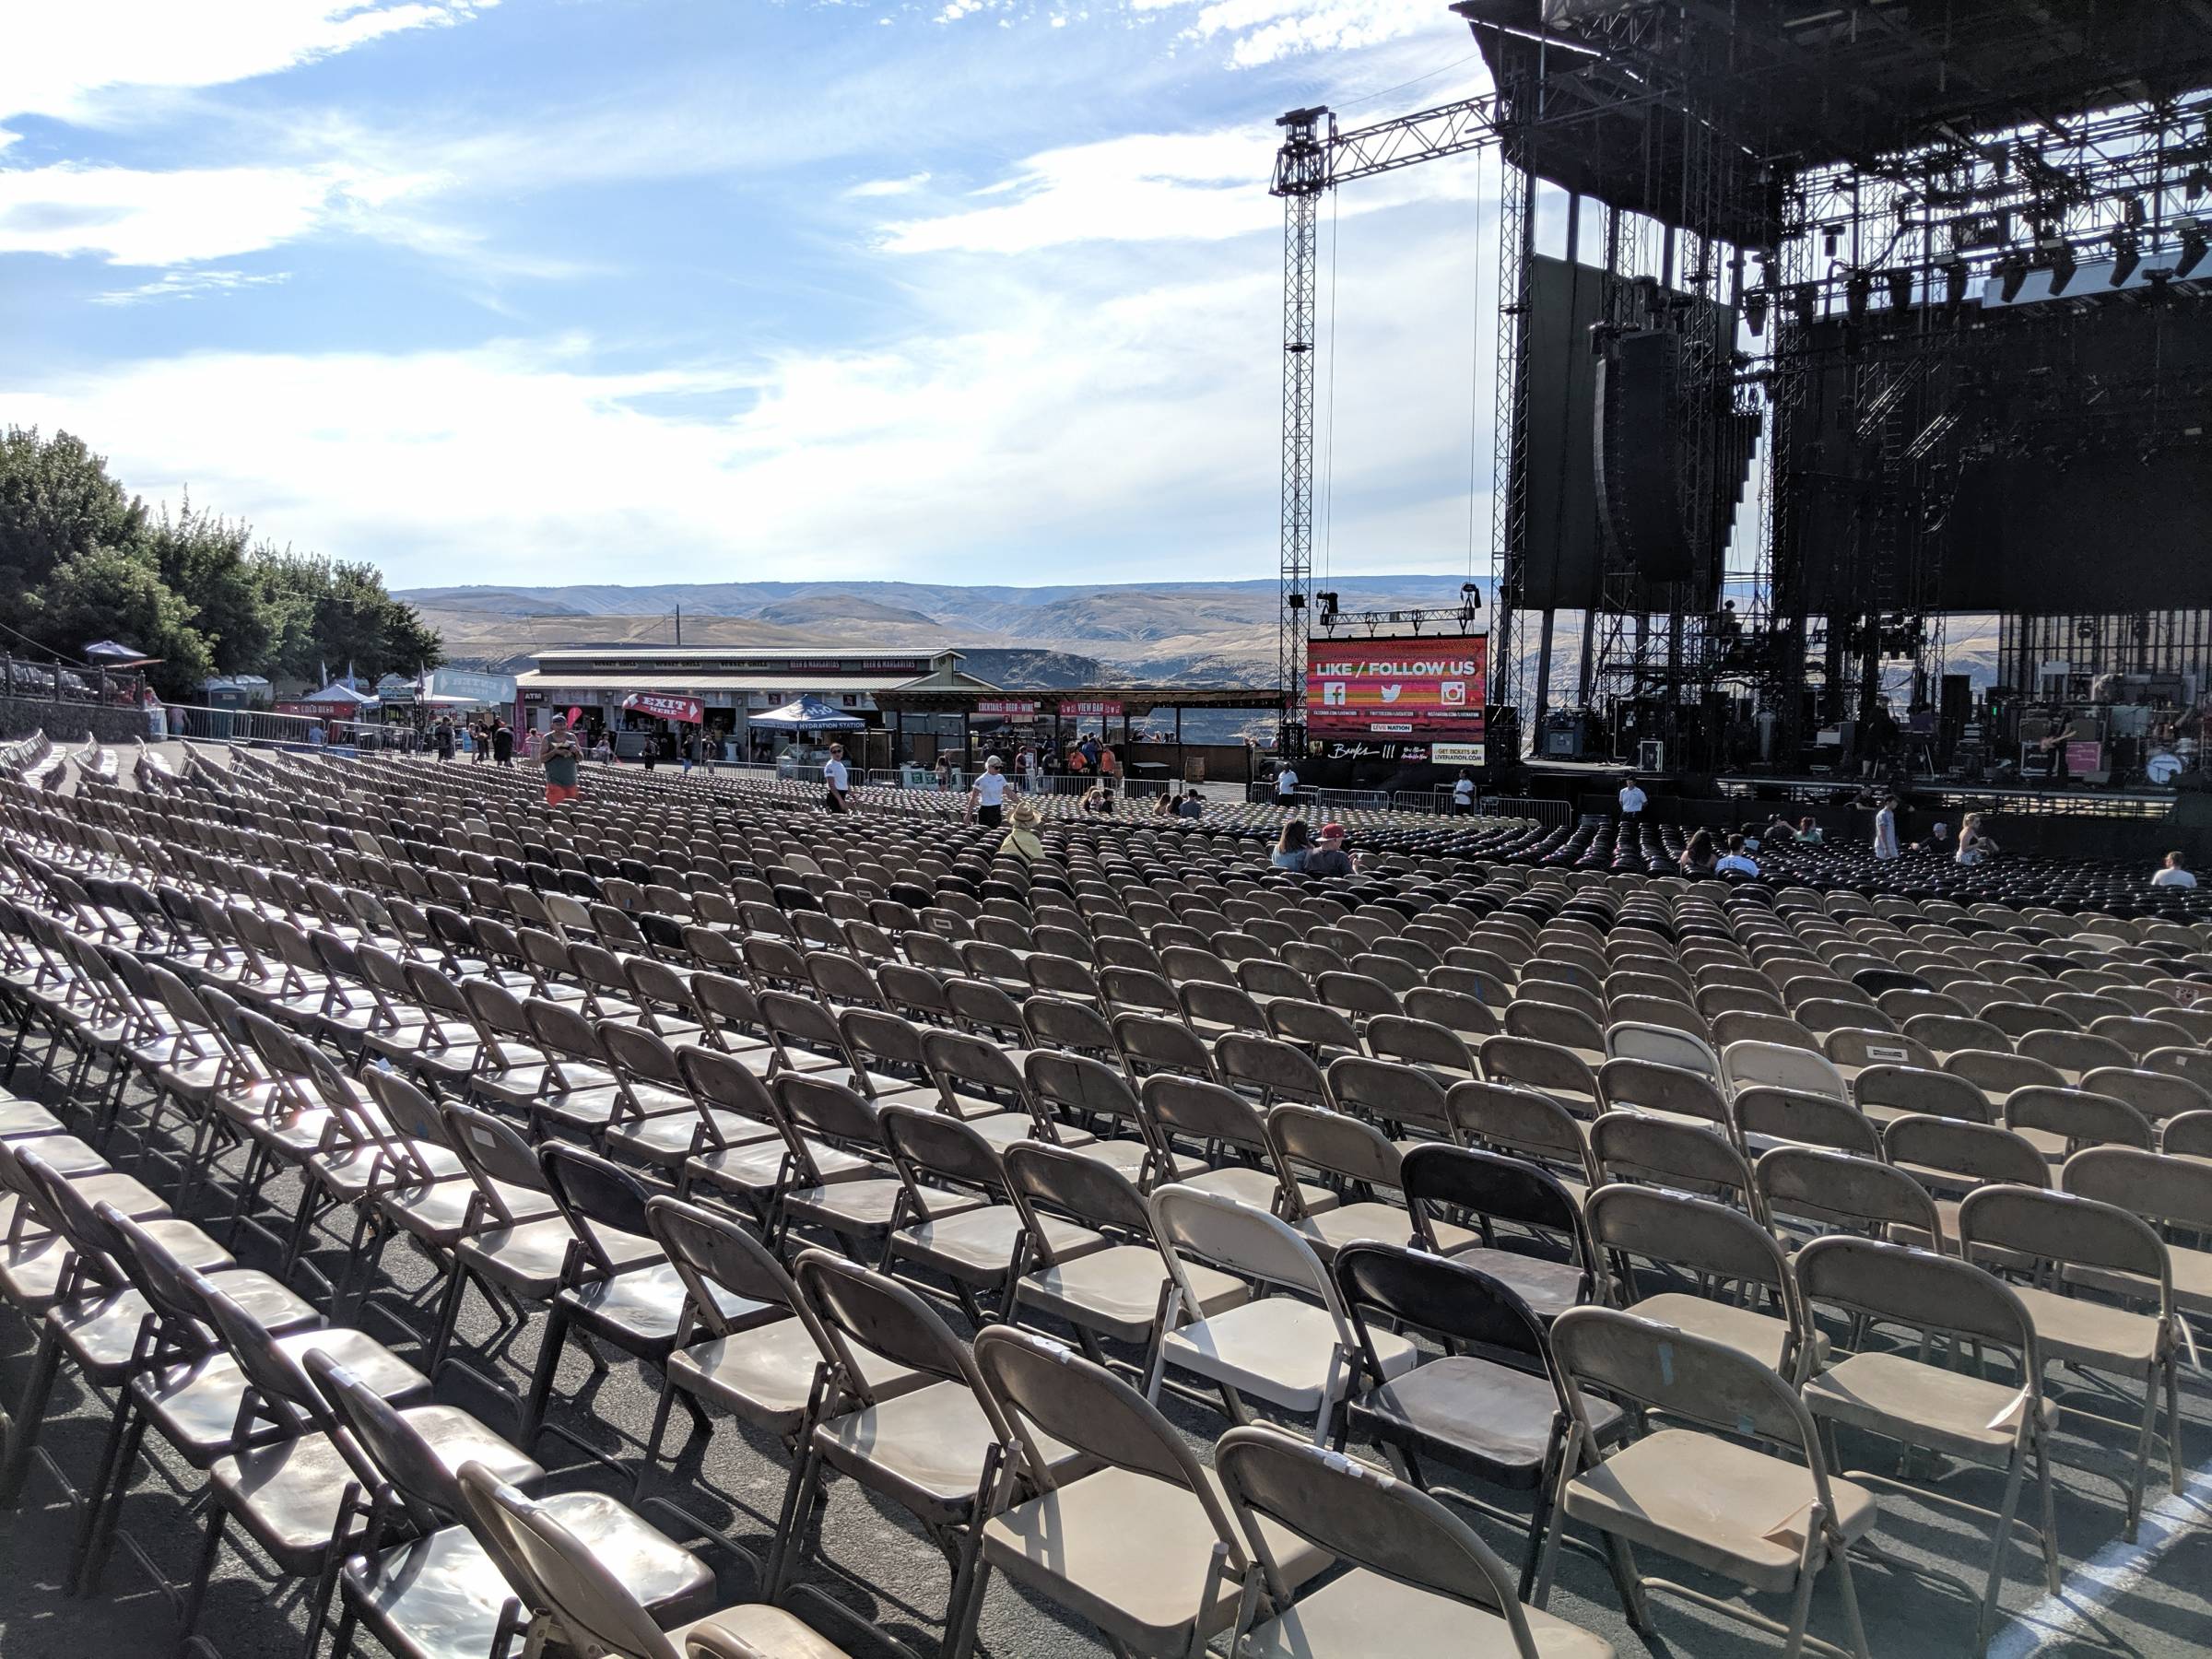 Reserved Seats at the Gorge